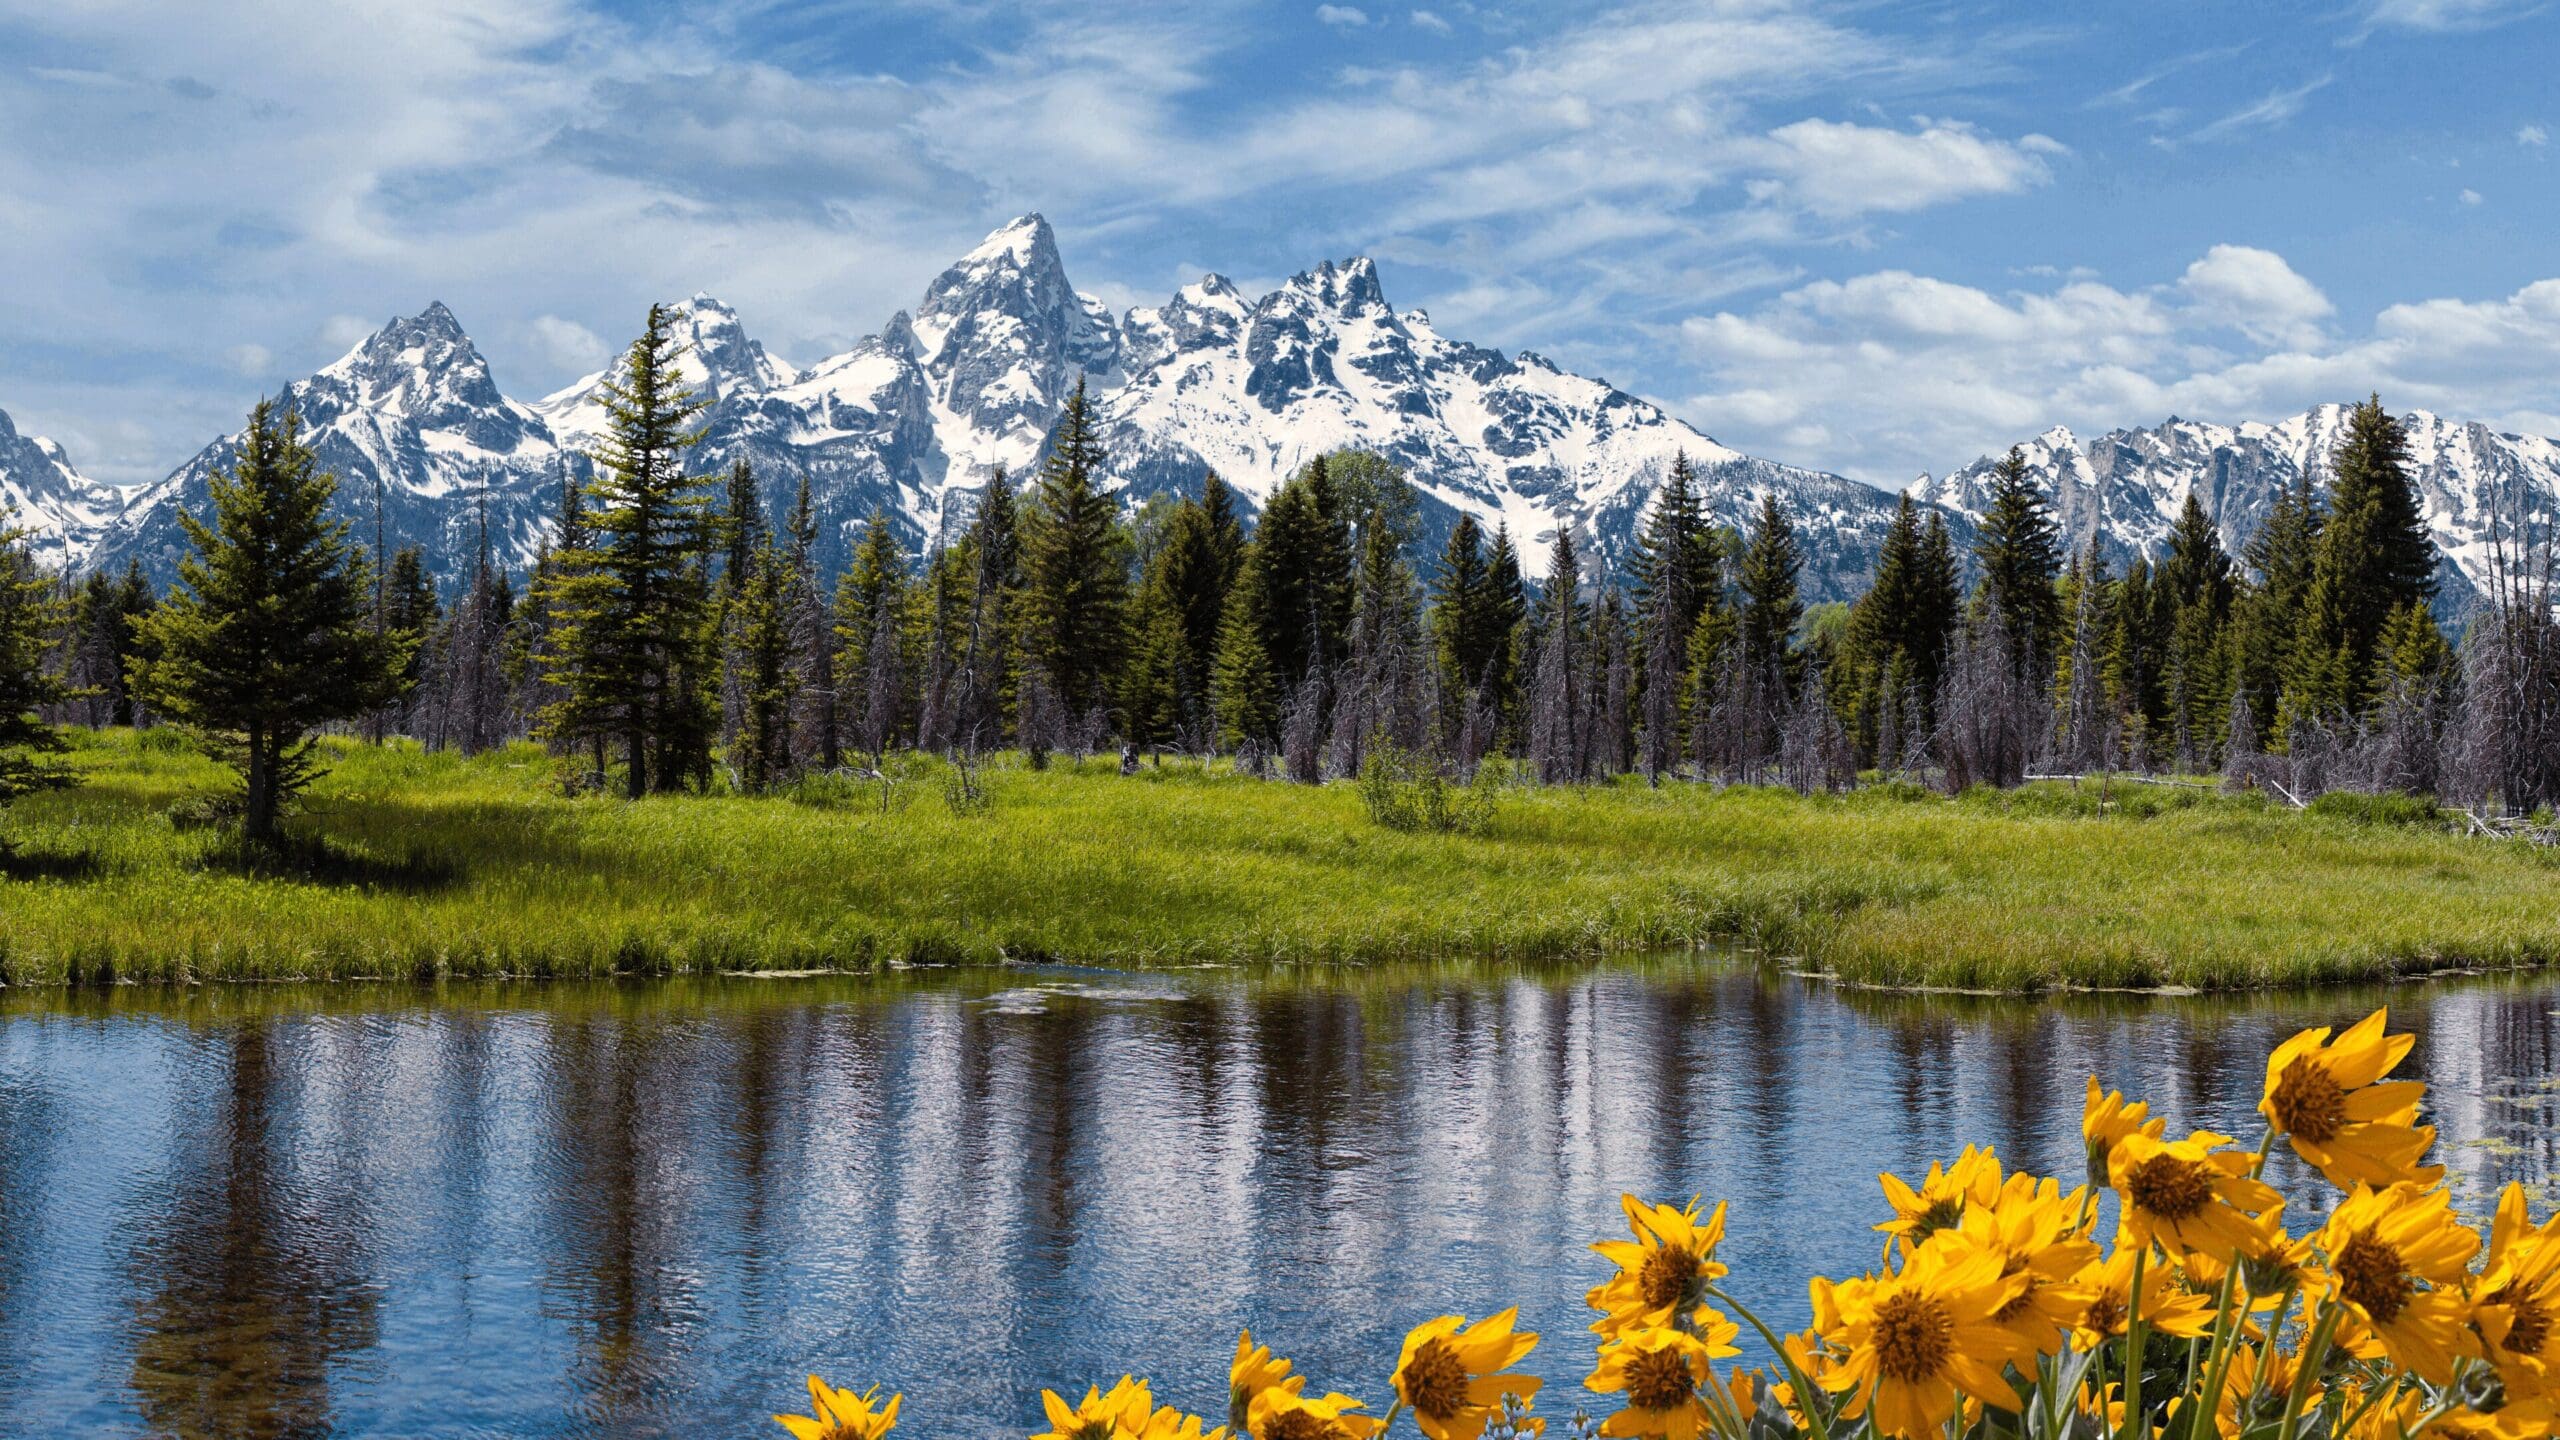 reflective lake with yellow wild flowers in foreground and mountains and alpine trees in the background